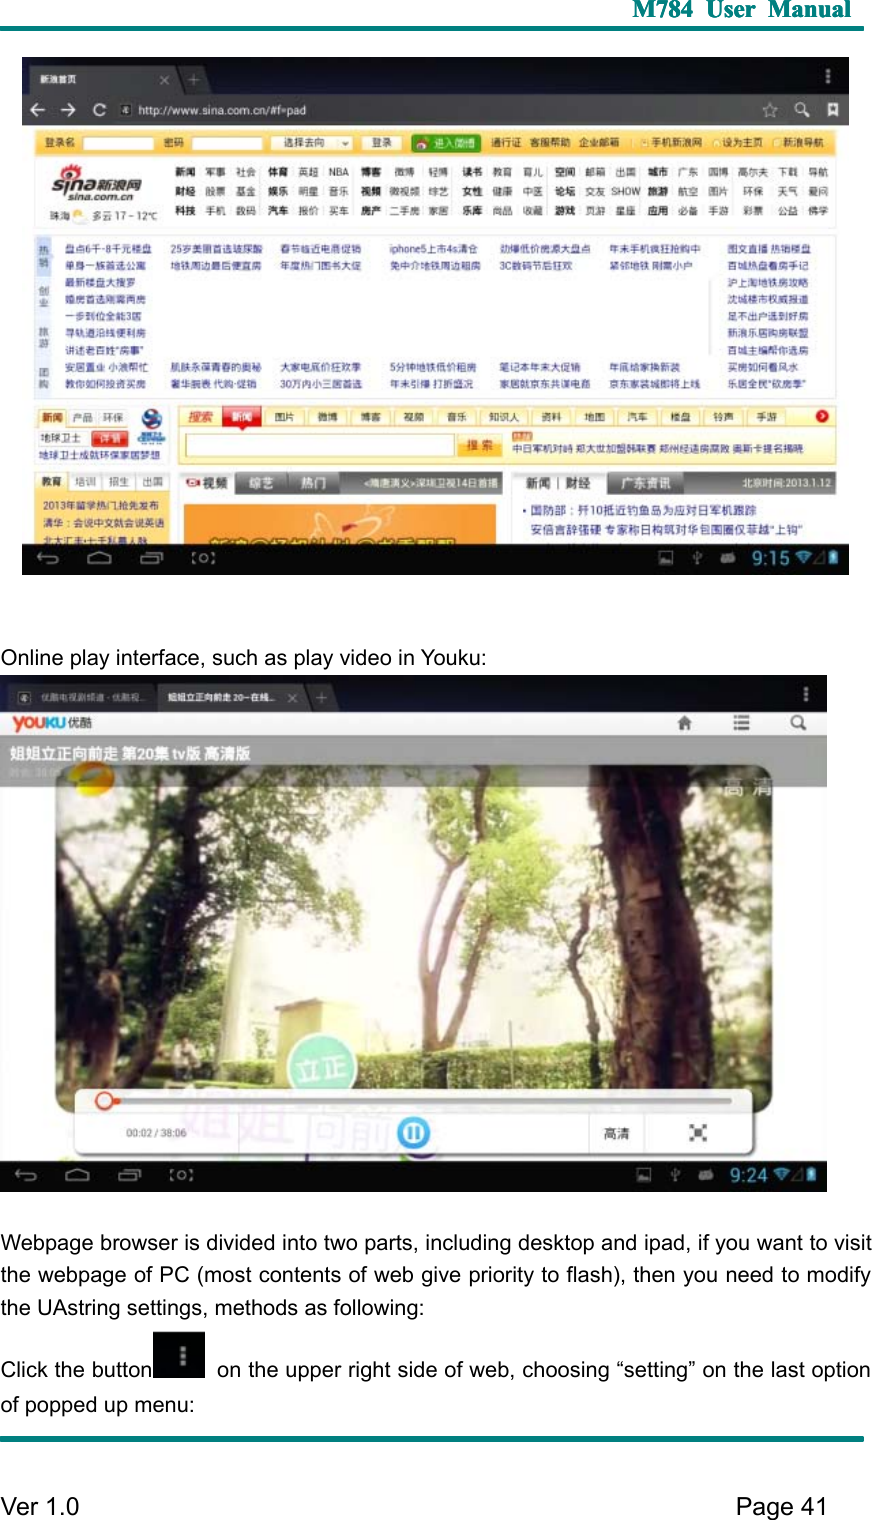 M784M784M784M784 UserUserUserUser ManualManualManualManualVer 1 .0 Page41O nline play interface, such as play video in Youku:W ebpage browser is divided into two parts, including desktop and ipad , if you want to visitthe webpage of PC ( most contents of web give priority to flash), then you need to modifythe UAstring settings, methods as following:C lick the button on the upper right side of web, choosing “ setting ” on the last optionof popped up menu: